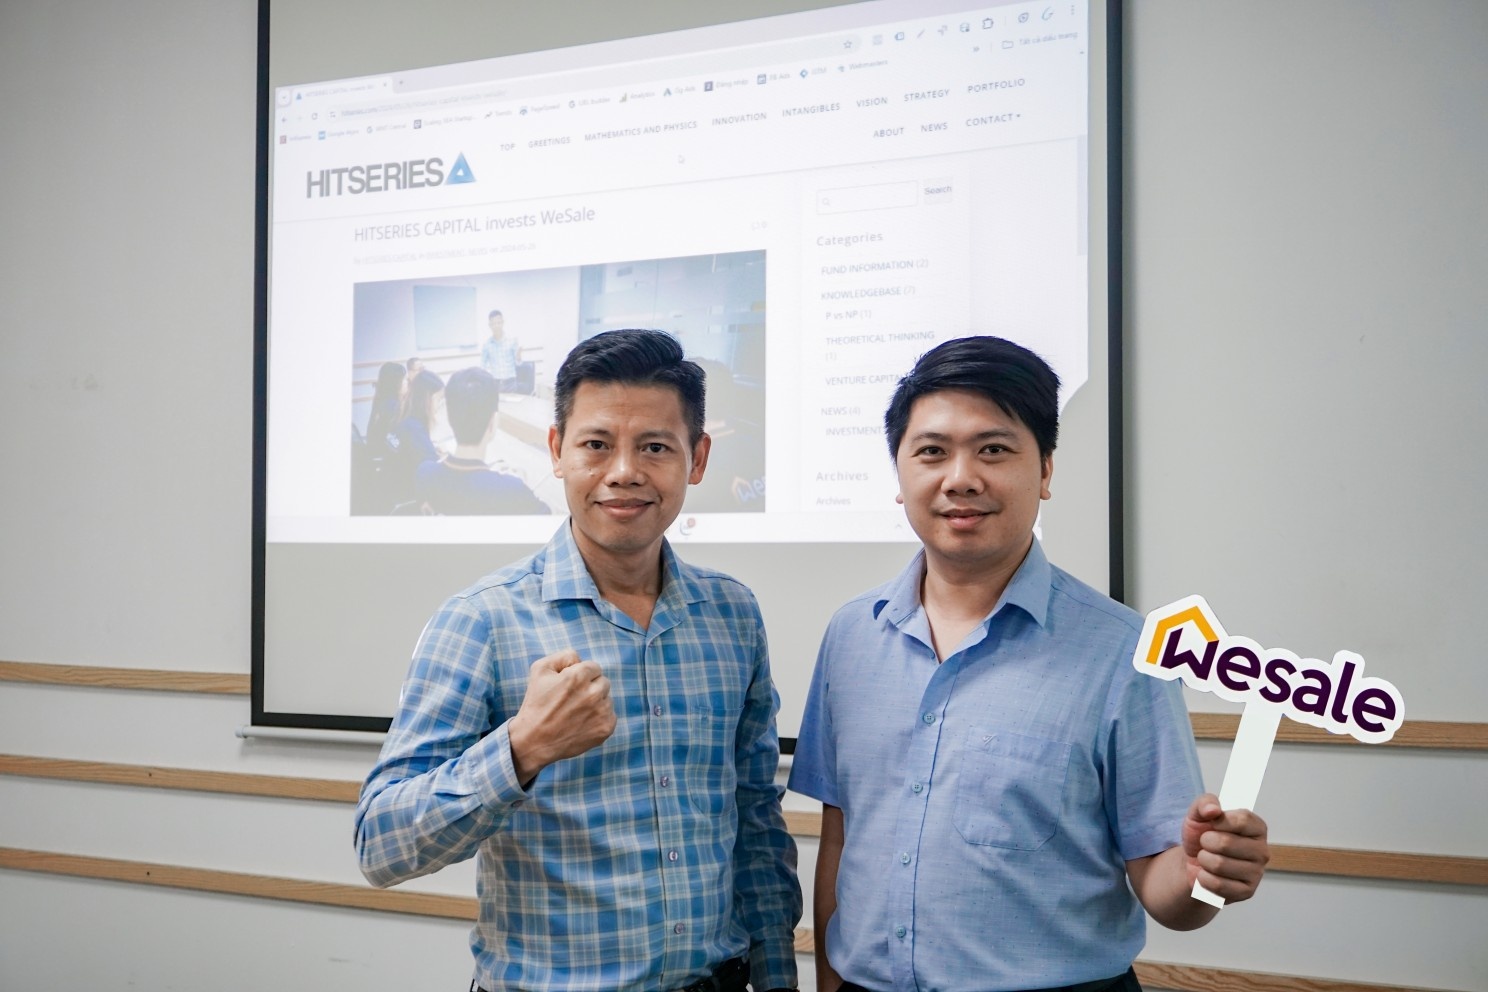 Vietnamese real estate platform WeSale secures seed funding from Singapore's Hitseries Capital